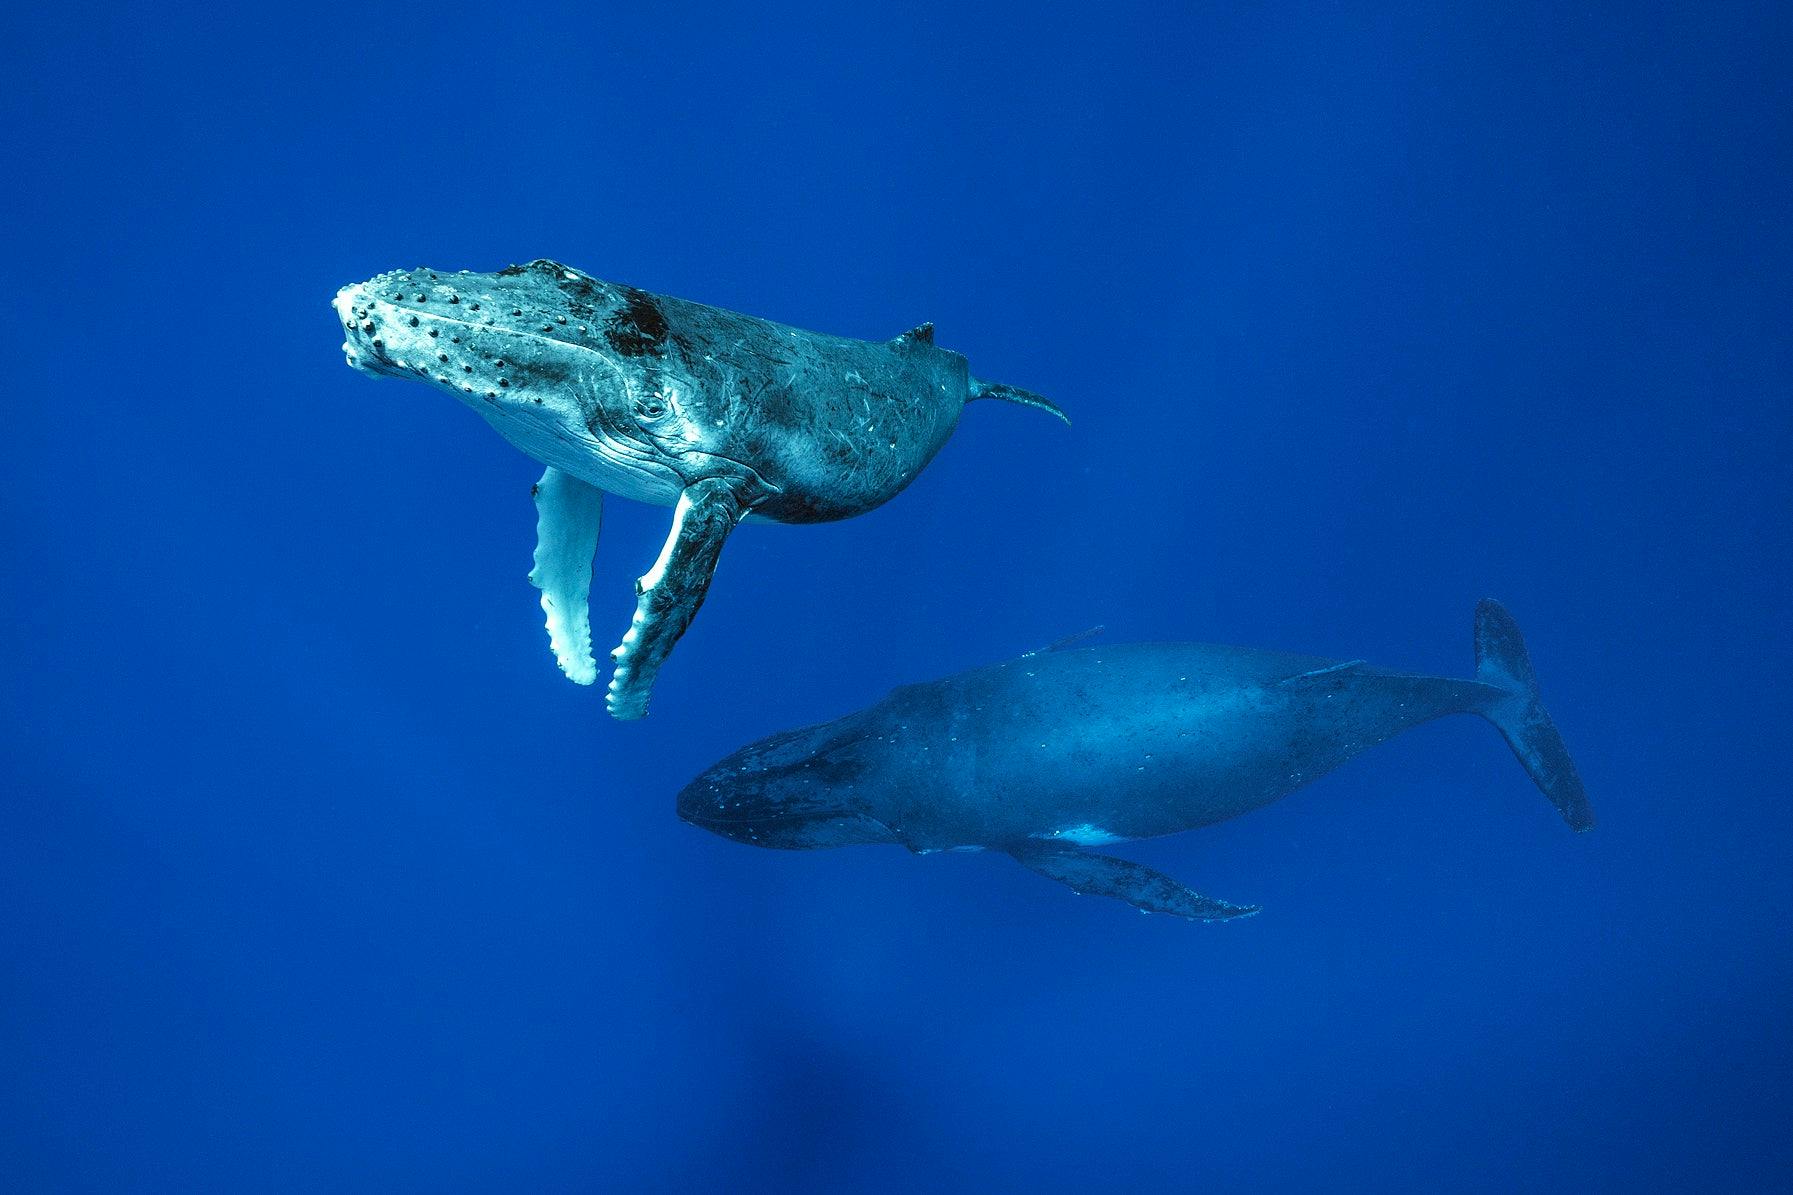 The Deepest Dive to Find the Secrets of the Whales